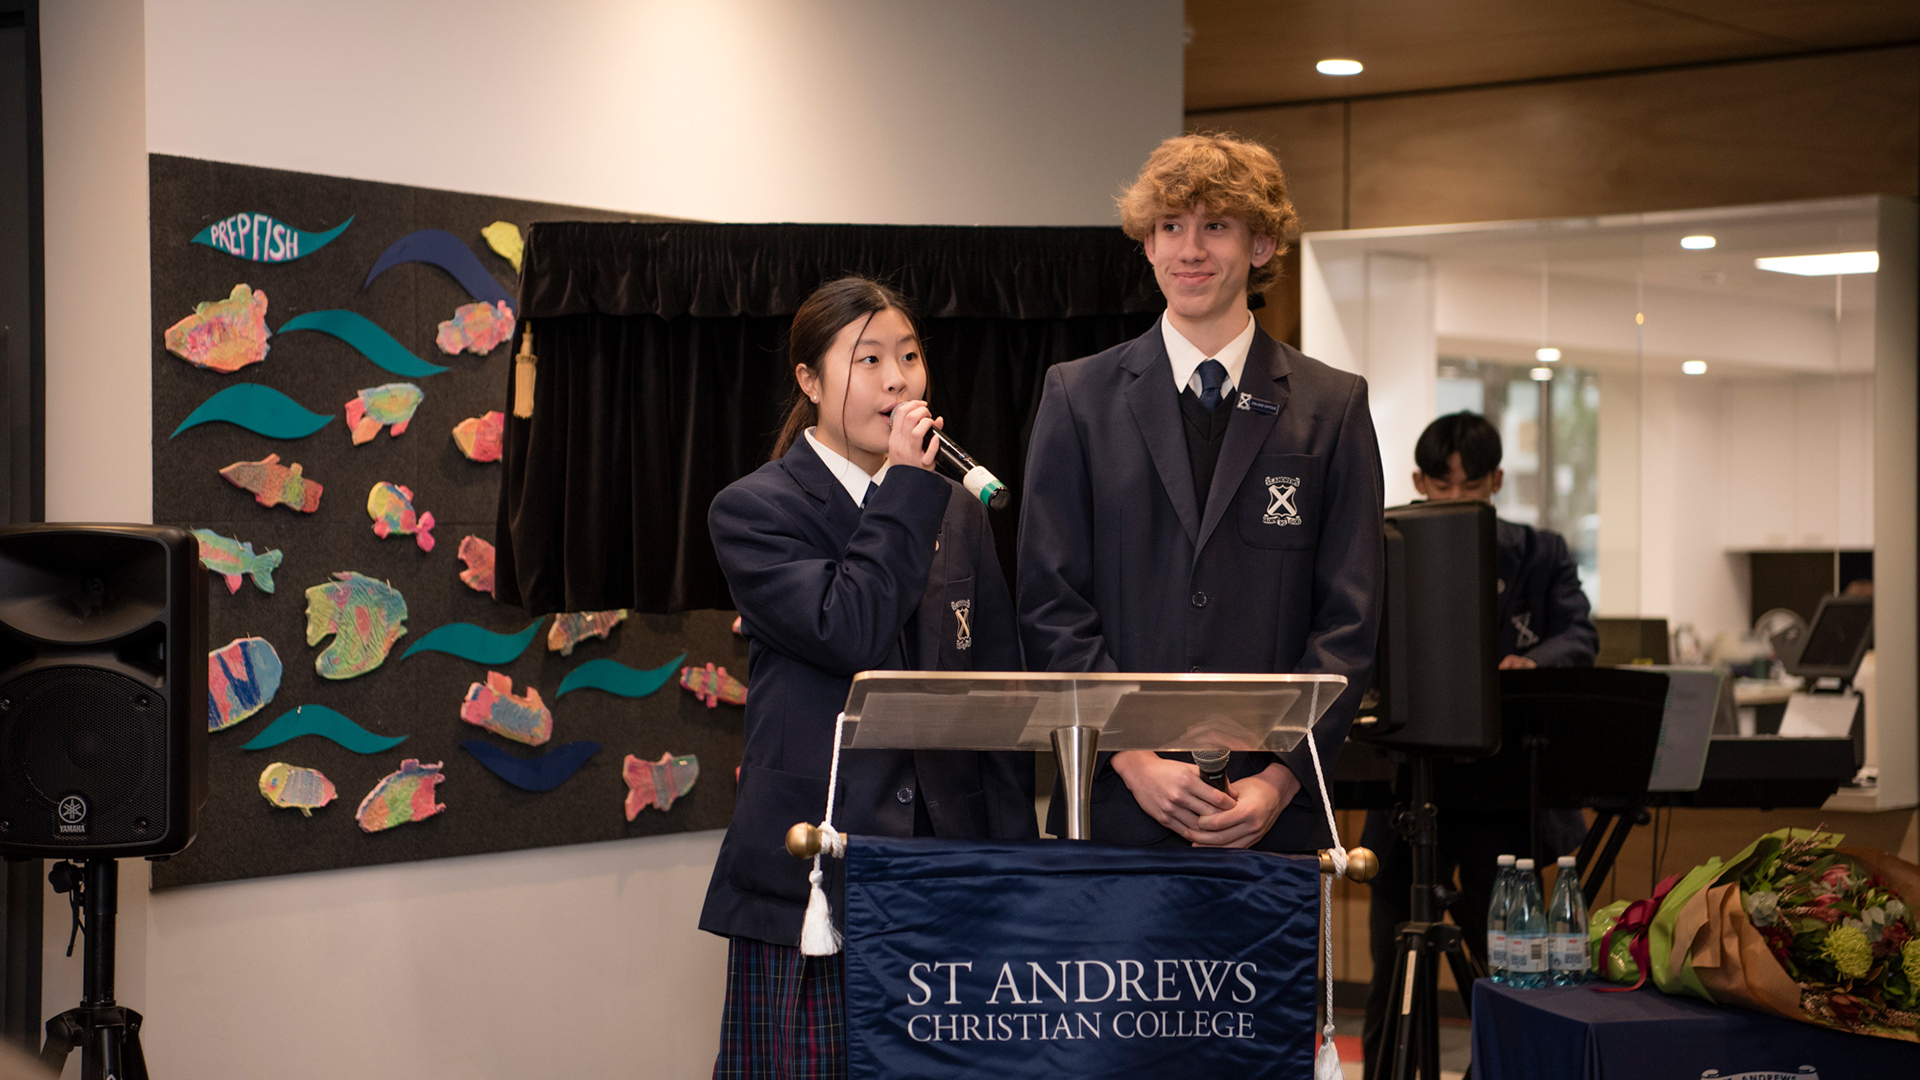 St. Andrews Christian College